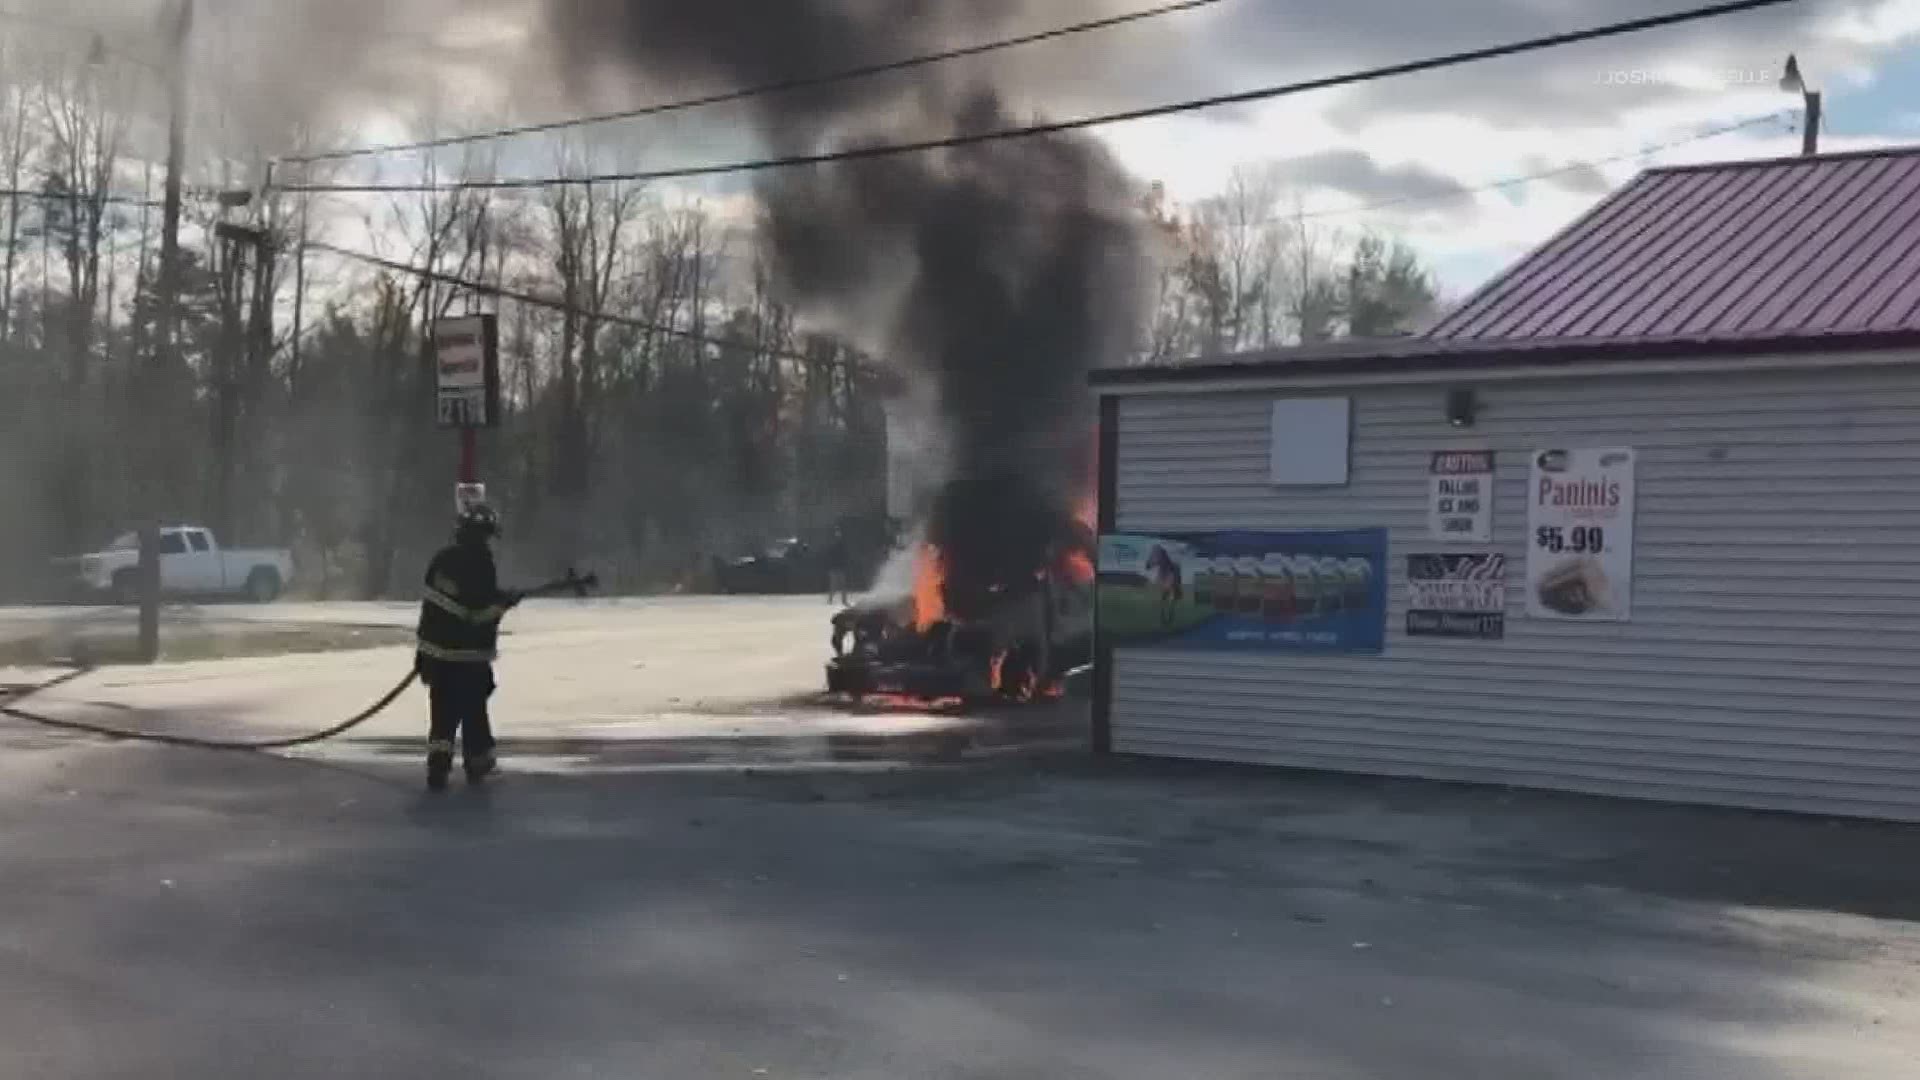 A pick-up truck on fire parked between gas pumps in Greenbush.